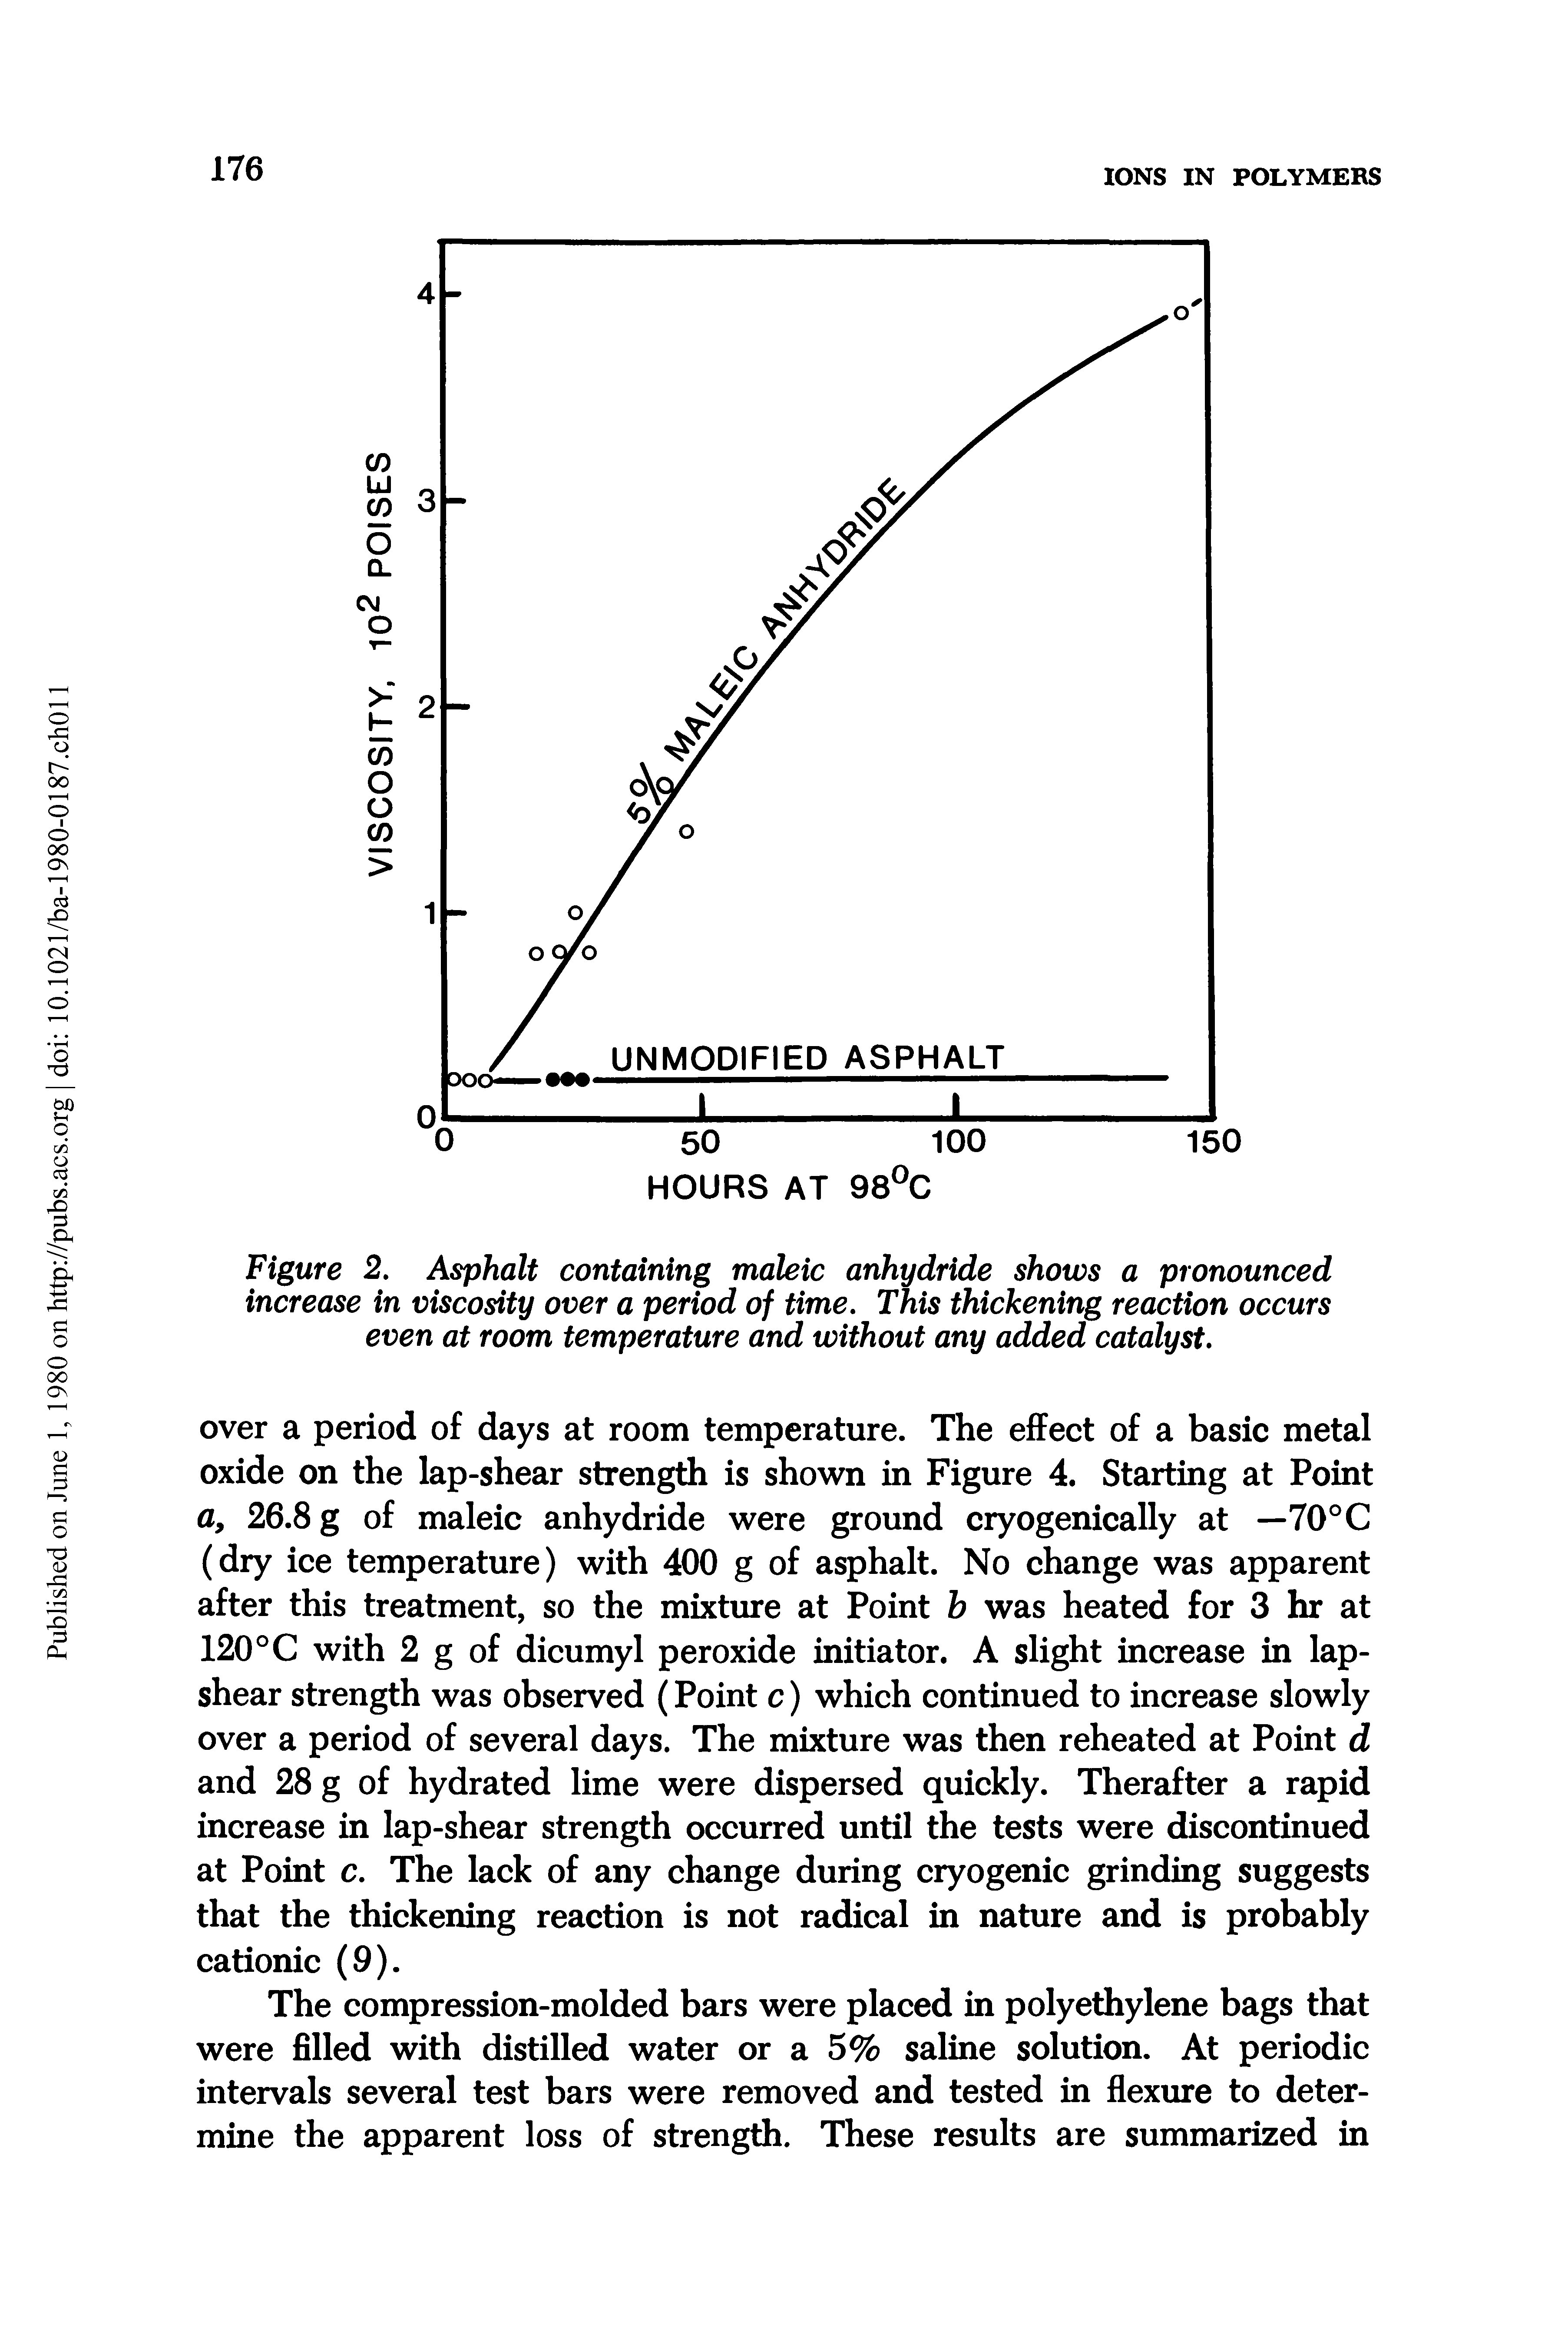 Figure 2. Asphalt containing maleic anhydride shows a pronounced increase in viscosity over a period of time. This thickening reaction occurs even at room temperature and without any added catalyst.